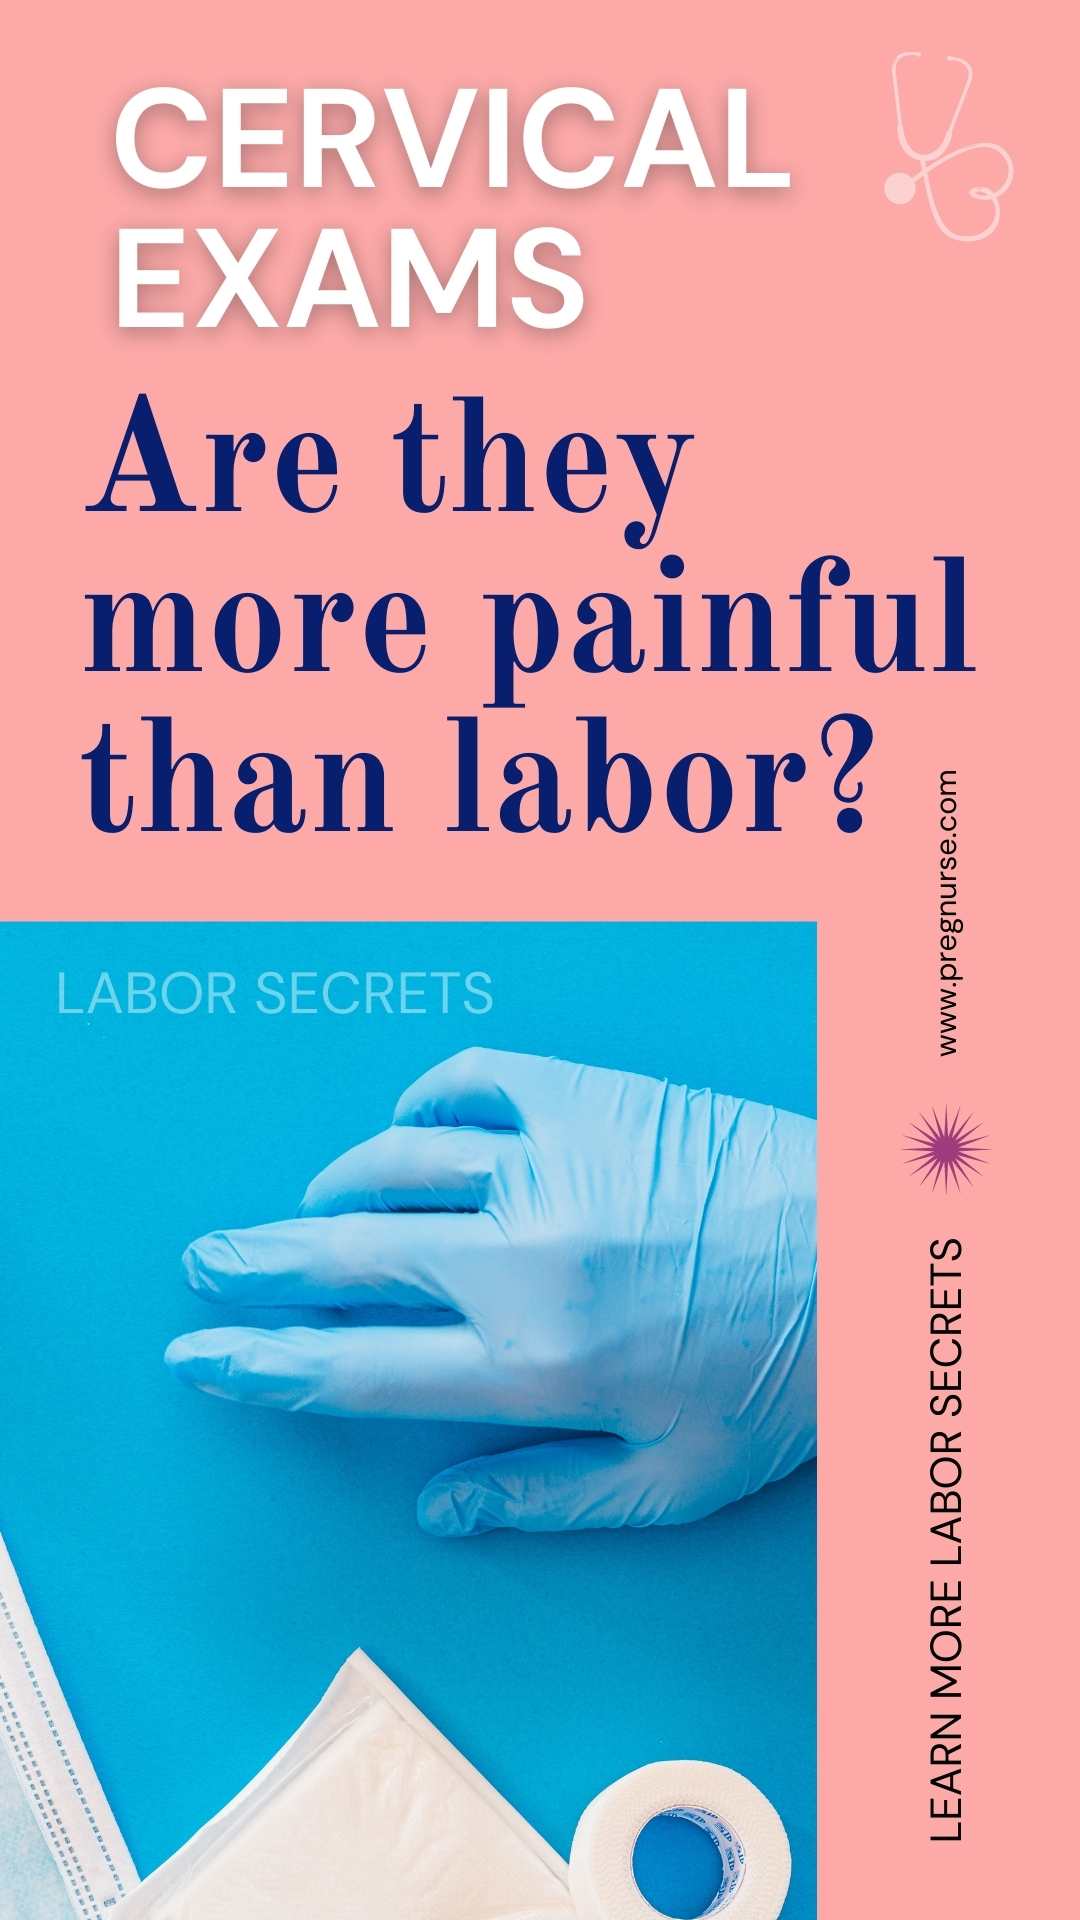 Think cervical checks are worse than labor? Discover what factors make cervical checks painful and how their pain compares to childbirth. Knowledge is power! via @pullingcurls